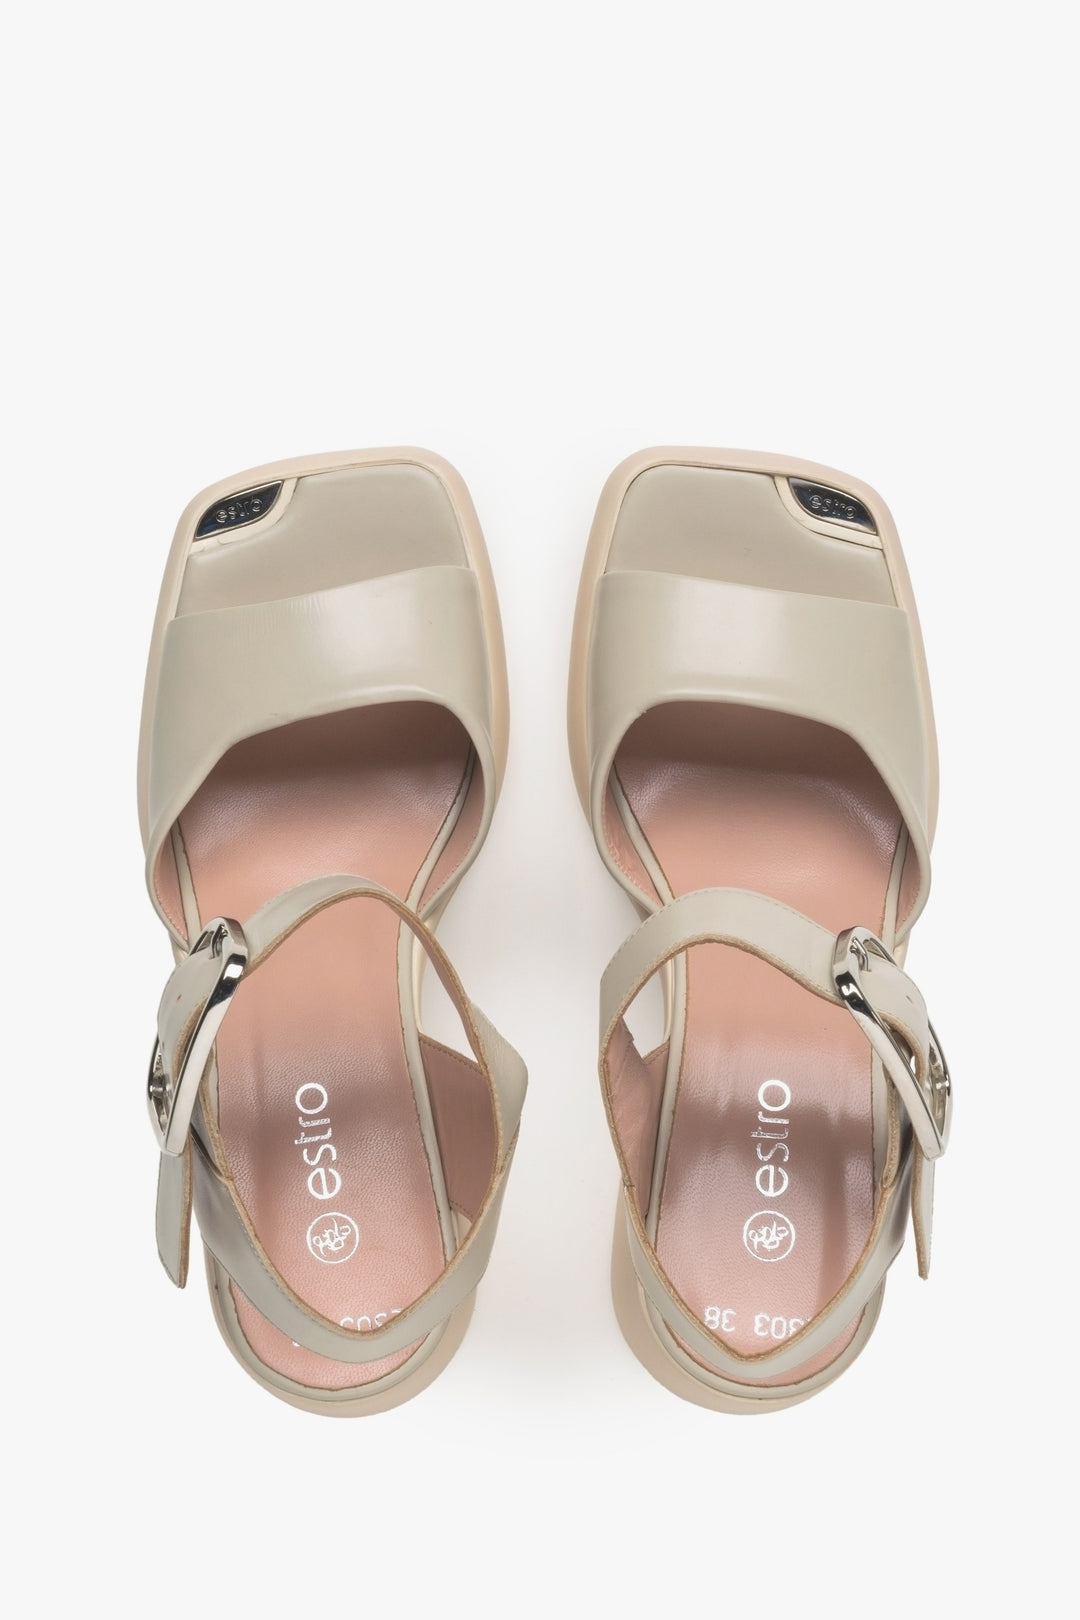 Women's beige-grey Estro sandals made of genuine leather - top view presentation of the model.